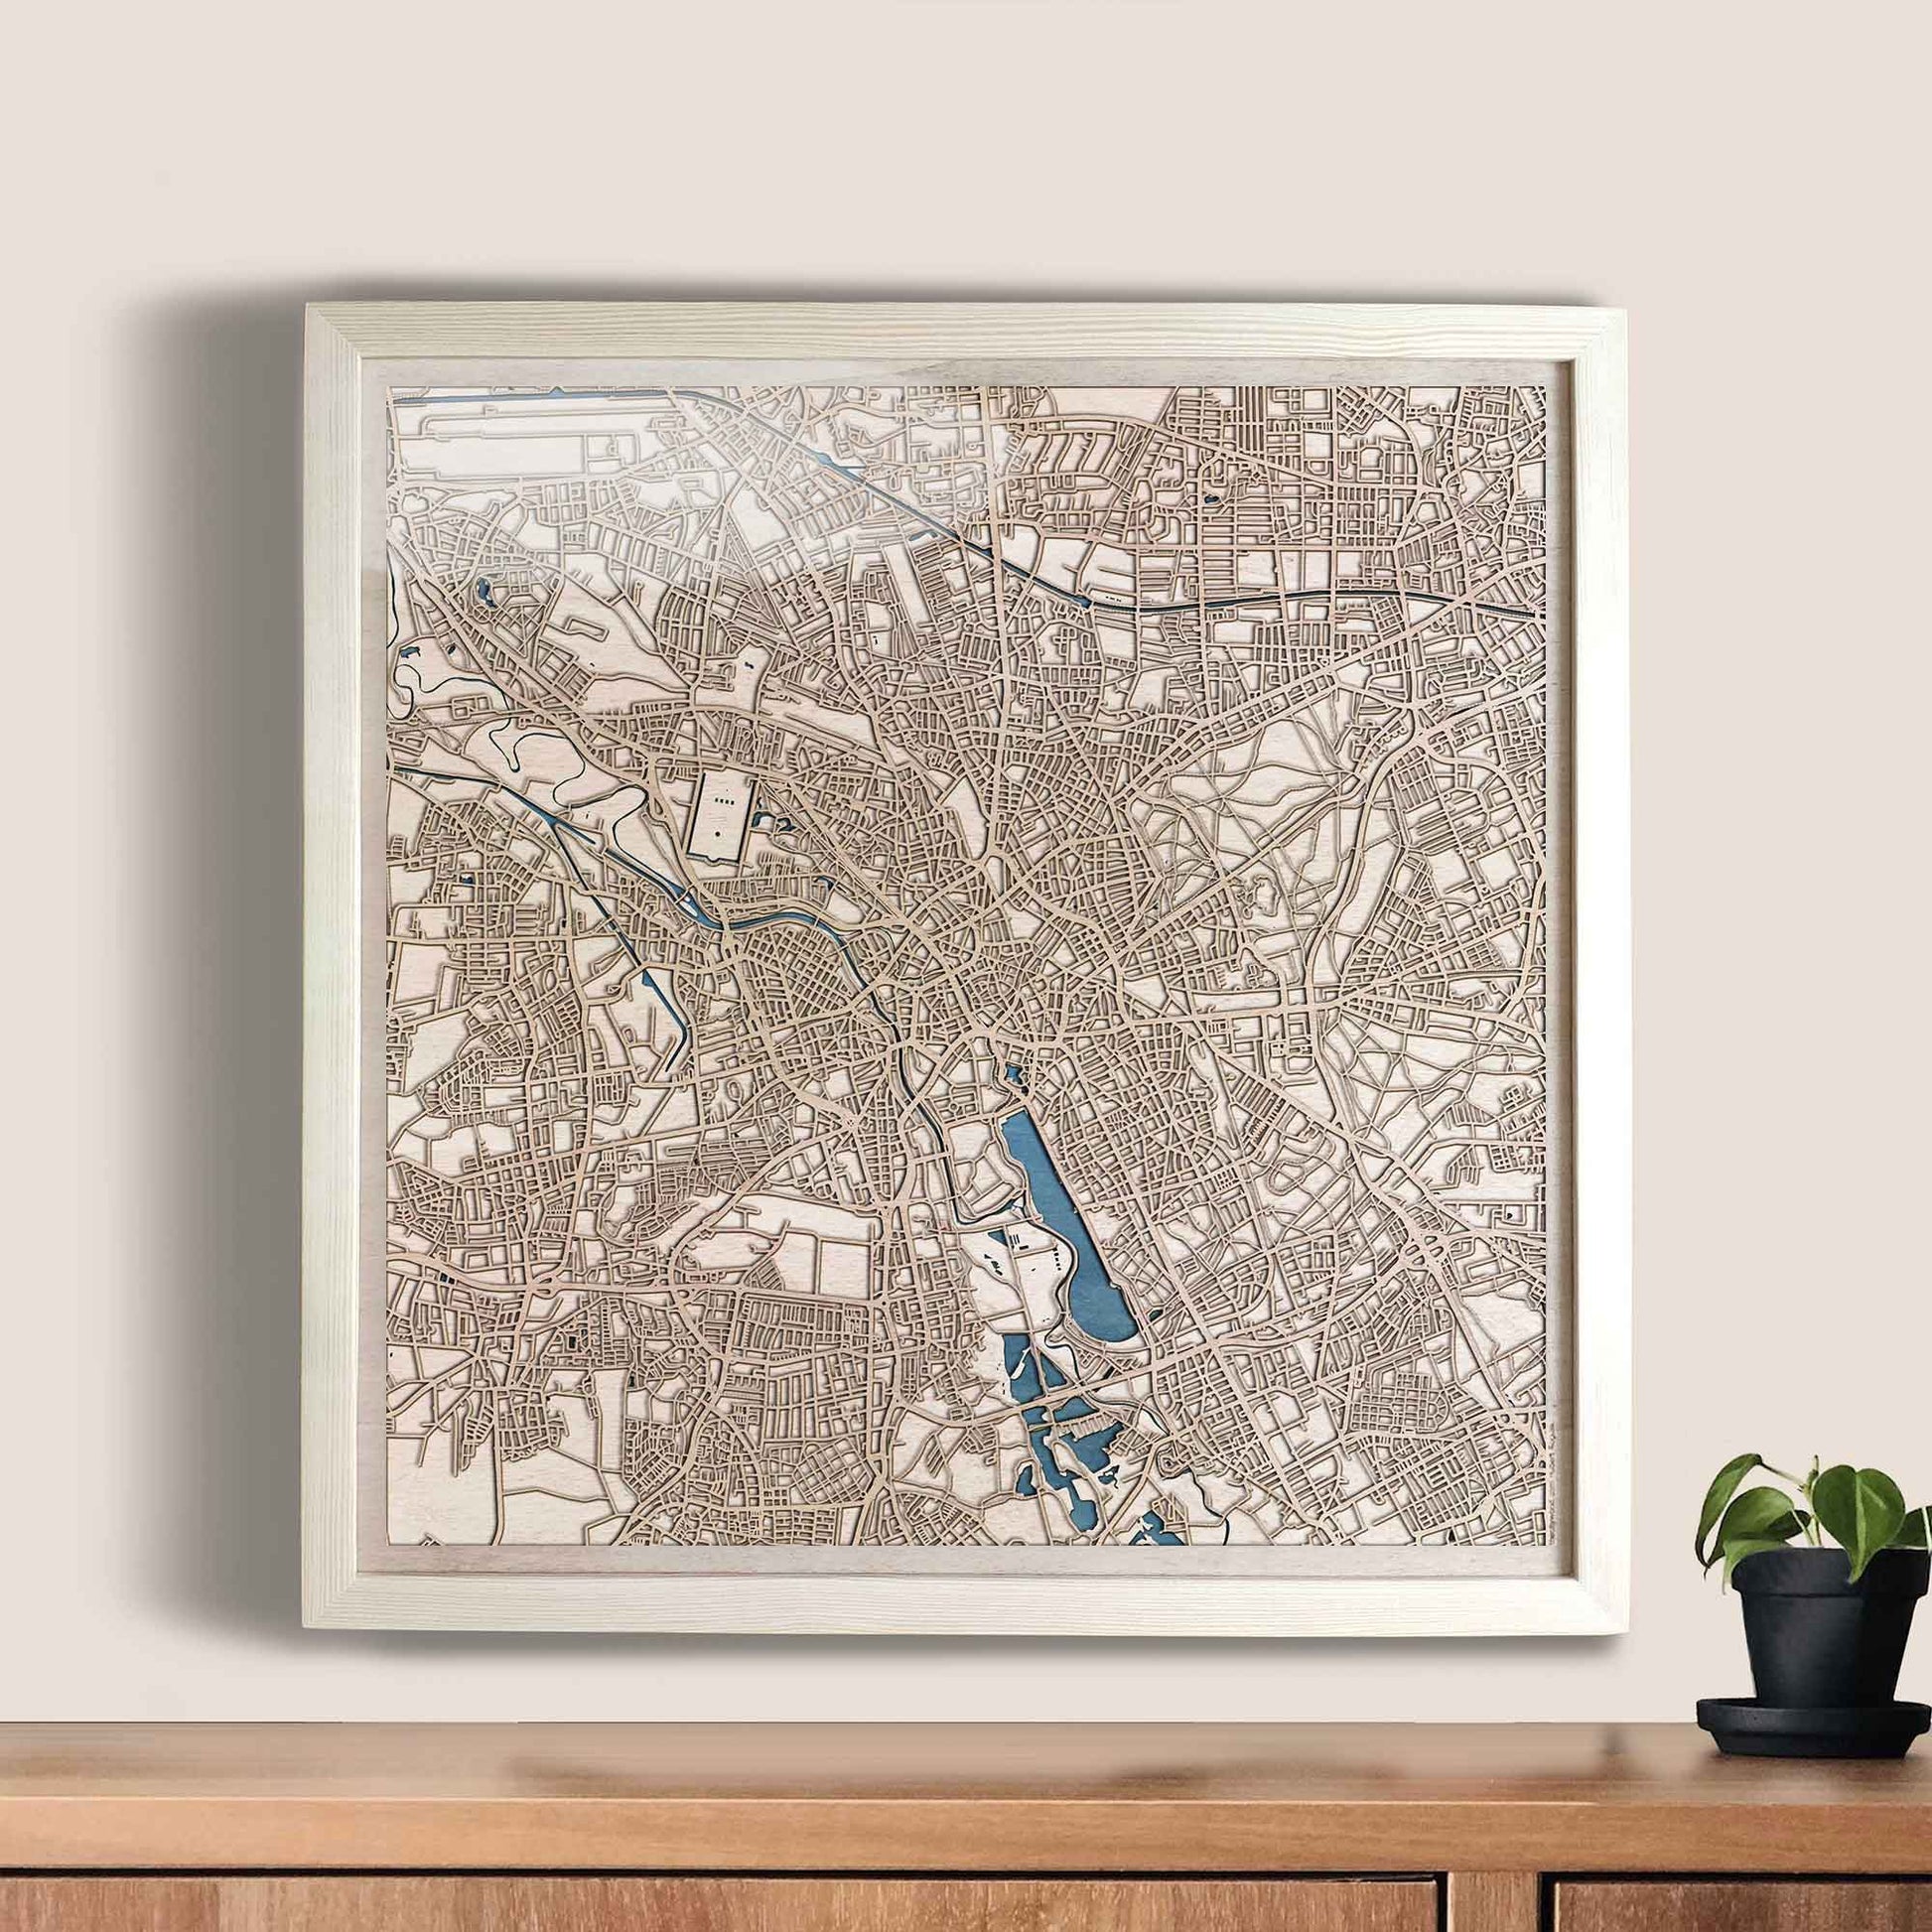 Hanover Wooden Map by CityWood - Custom Wood Map Art - Unique Laser Cut Engraved - Anniversary Gift